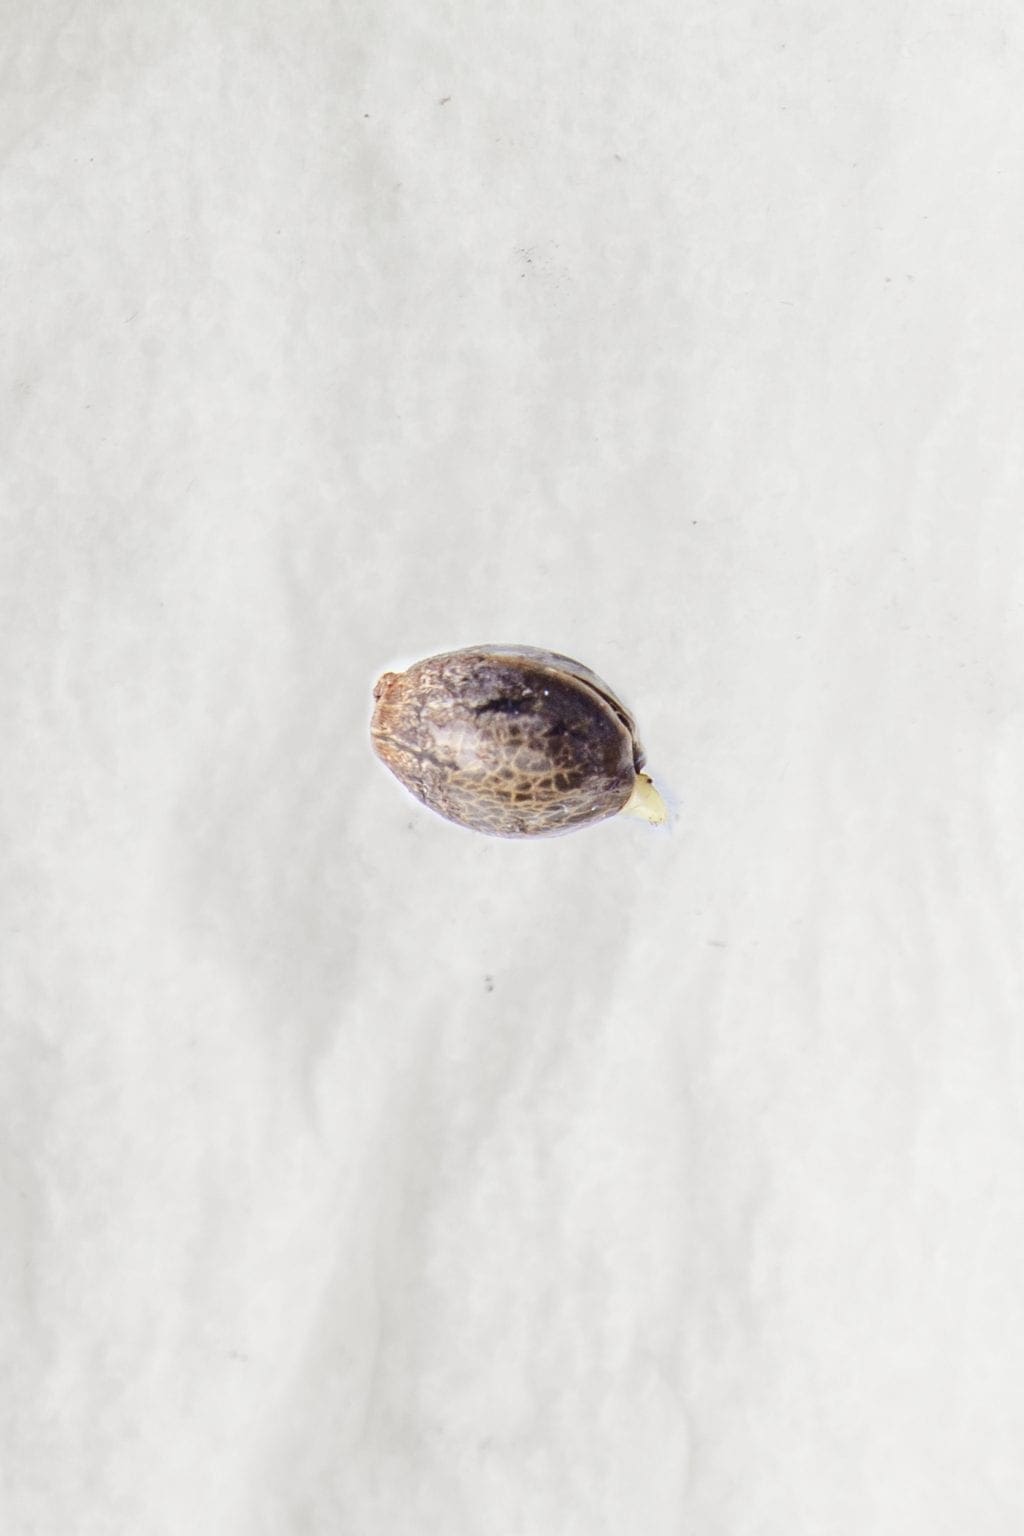 cannabis seed opening germinating